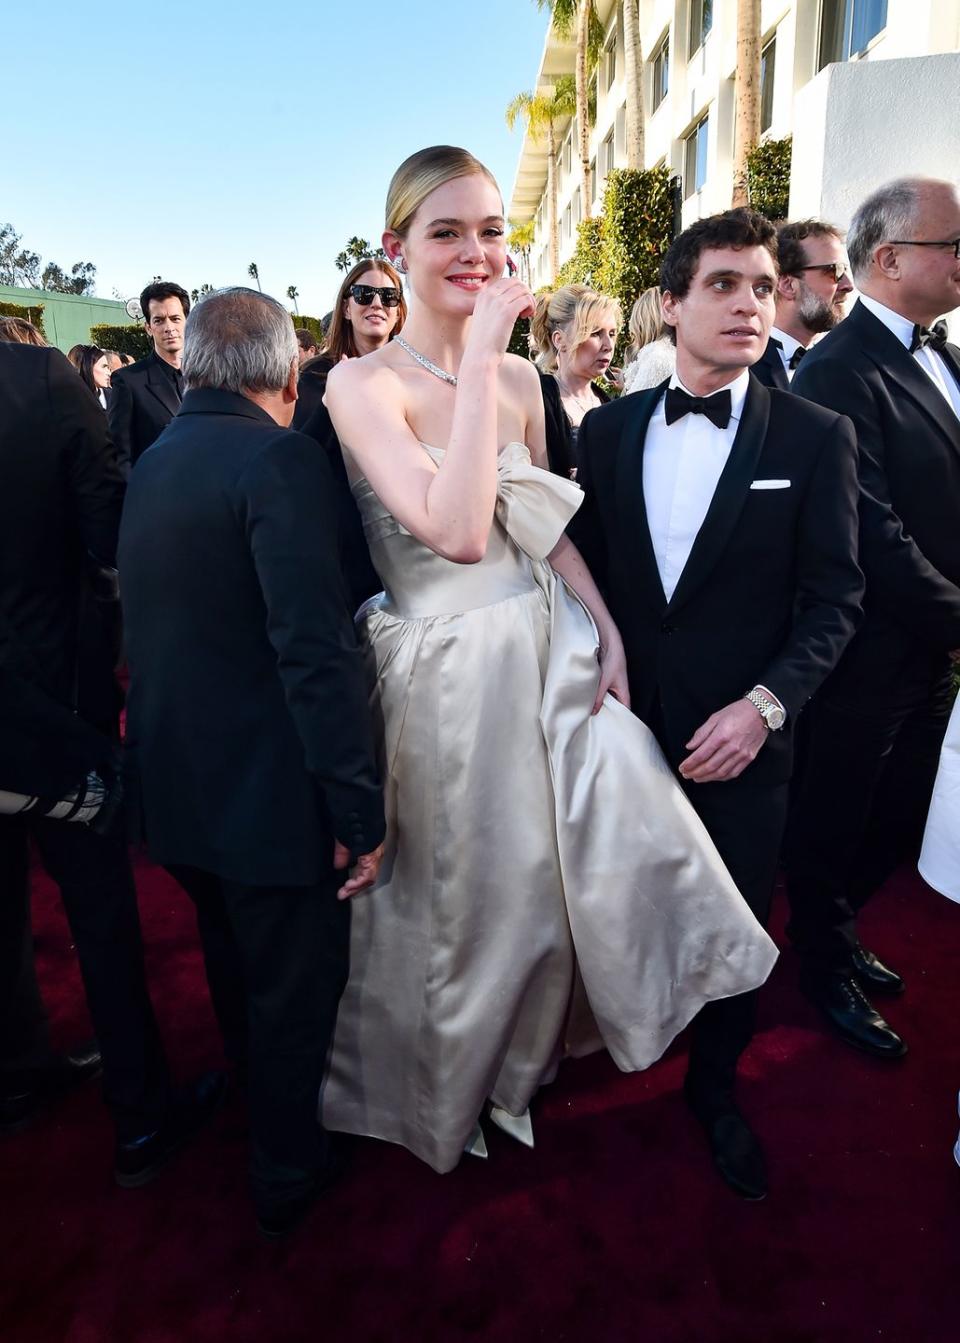 elle fanning at the 81st golden globe awards held at the beverly hilton hotel on january 7, 2024 in beverly hills, california photo by alberto rodriguezgolden globes 2024golden globes 2024 via getty images